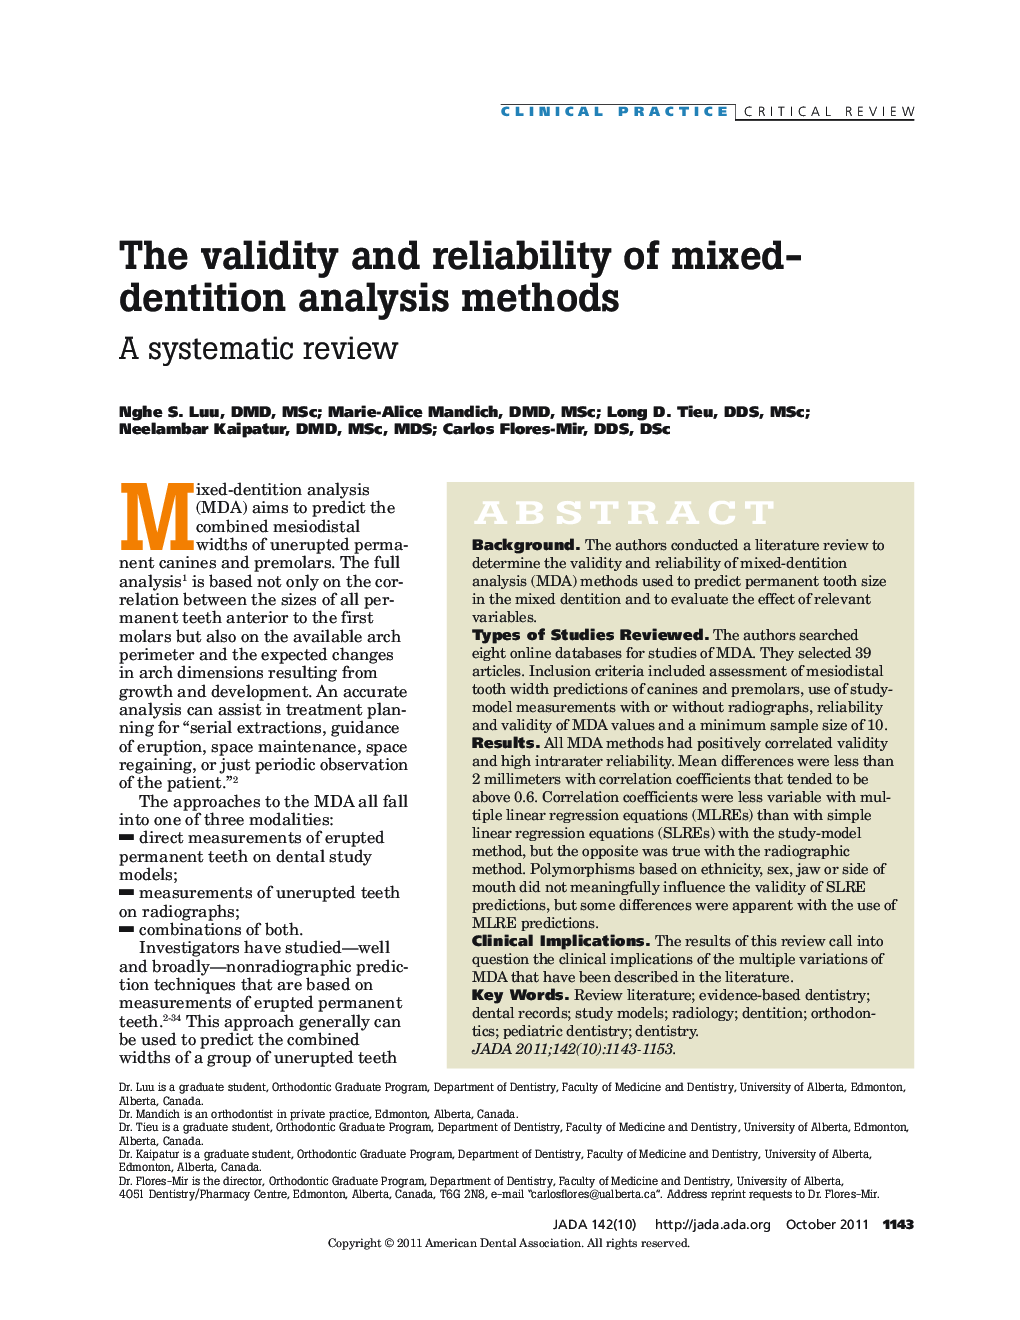 The validity and reliability of mixed-dentition analysis methods : A systematic review